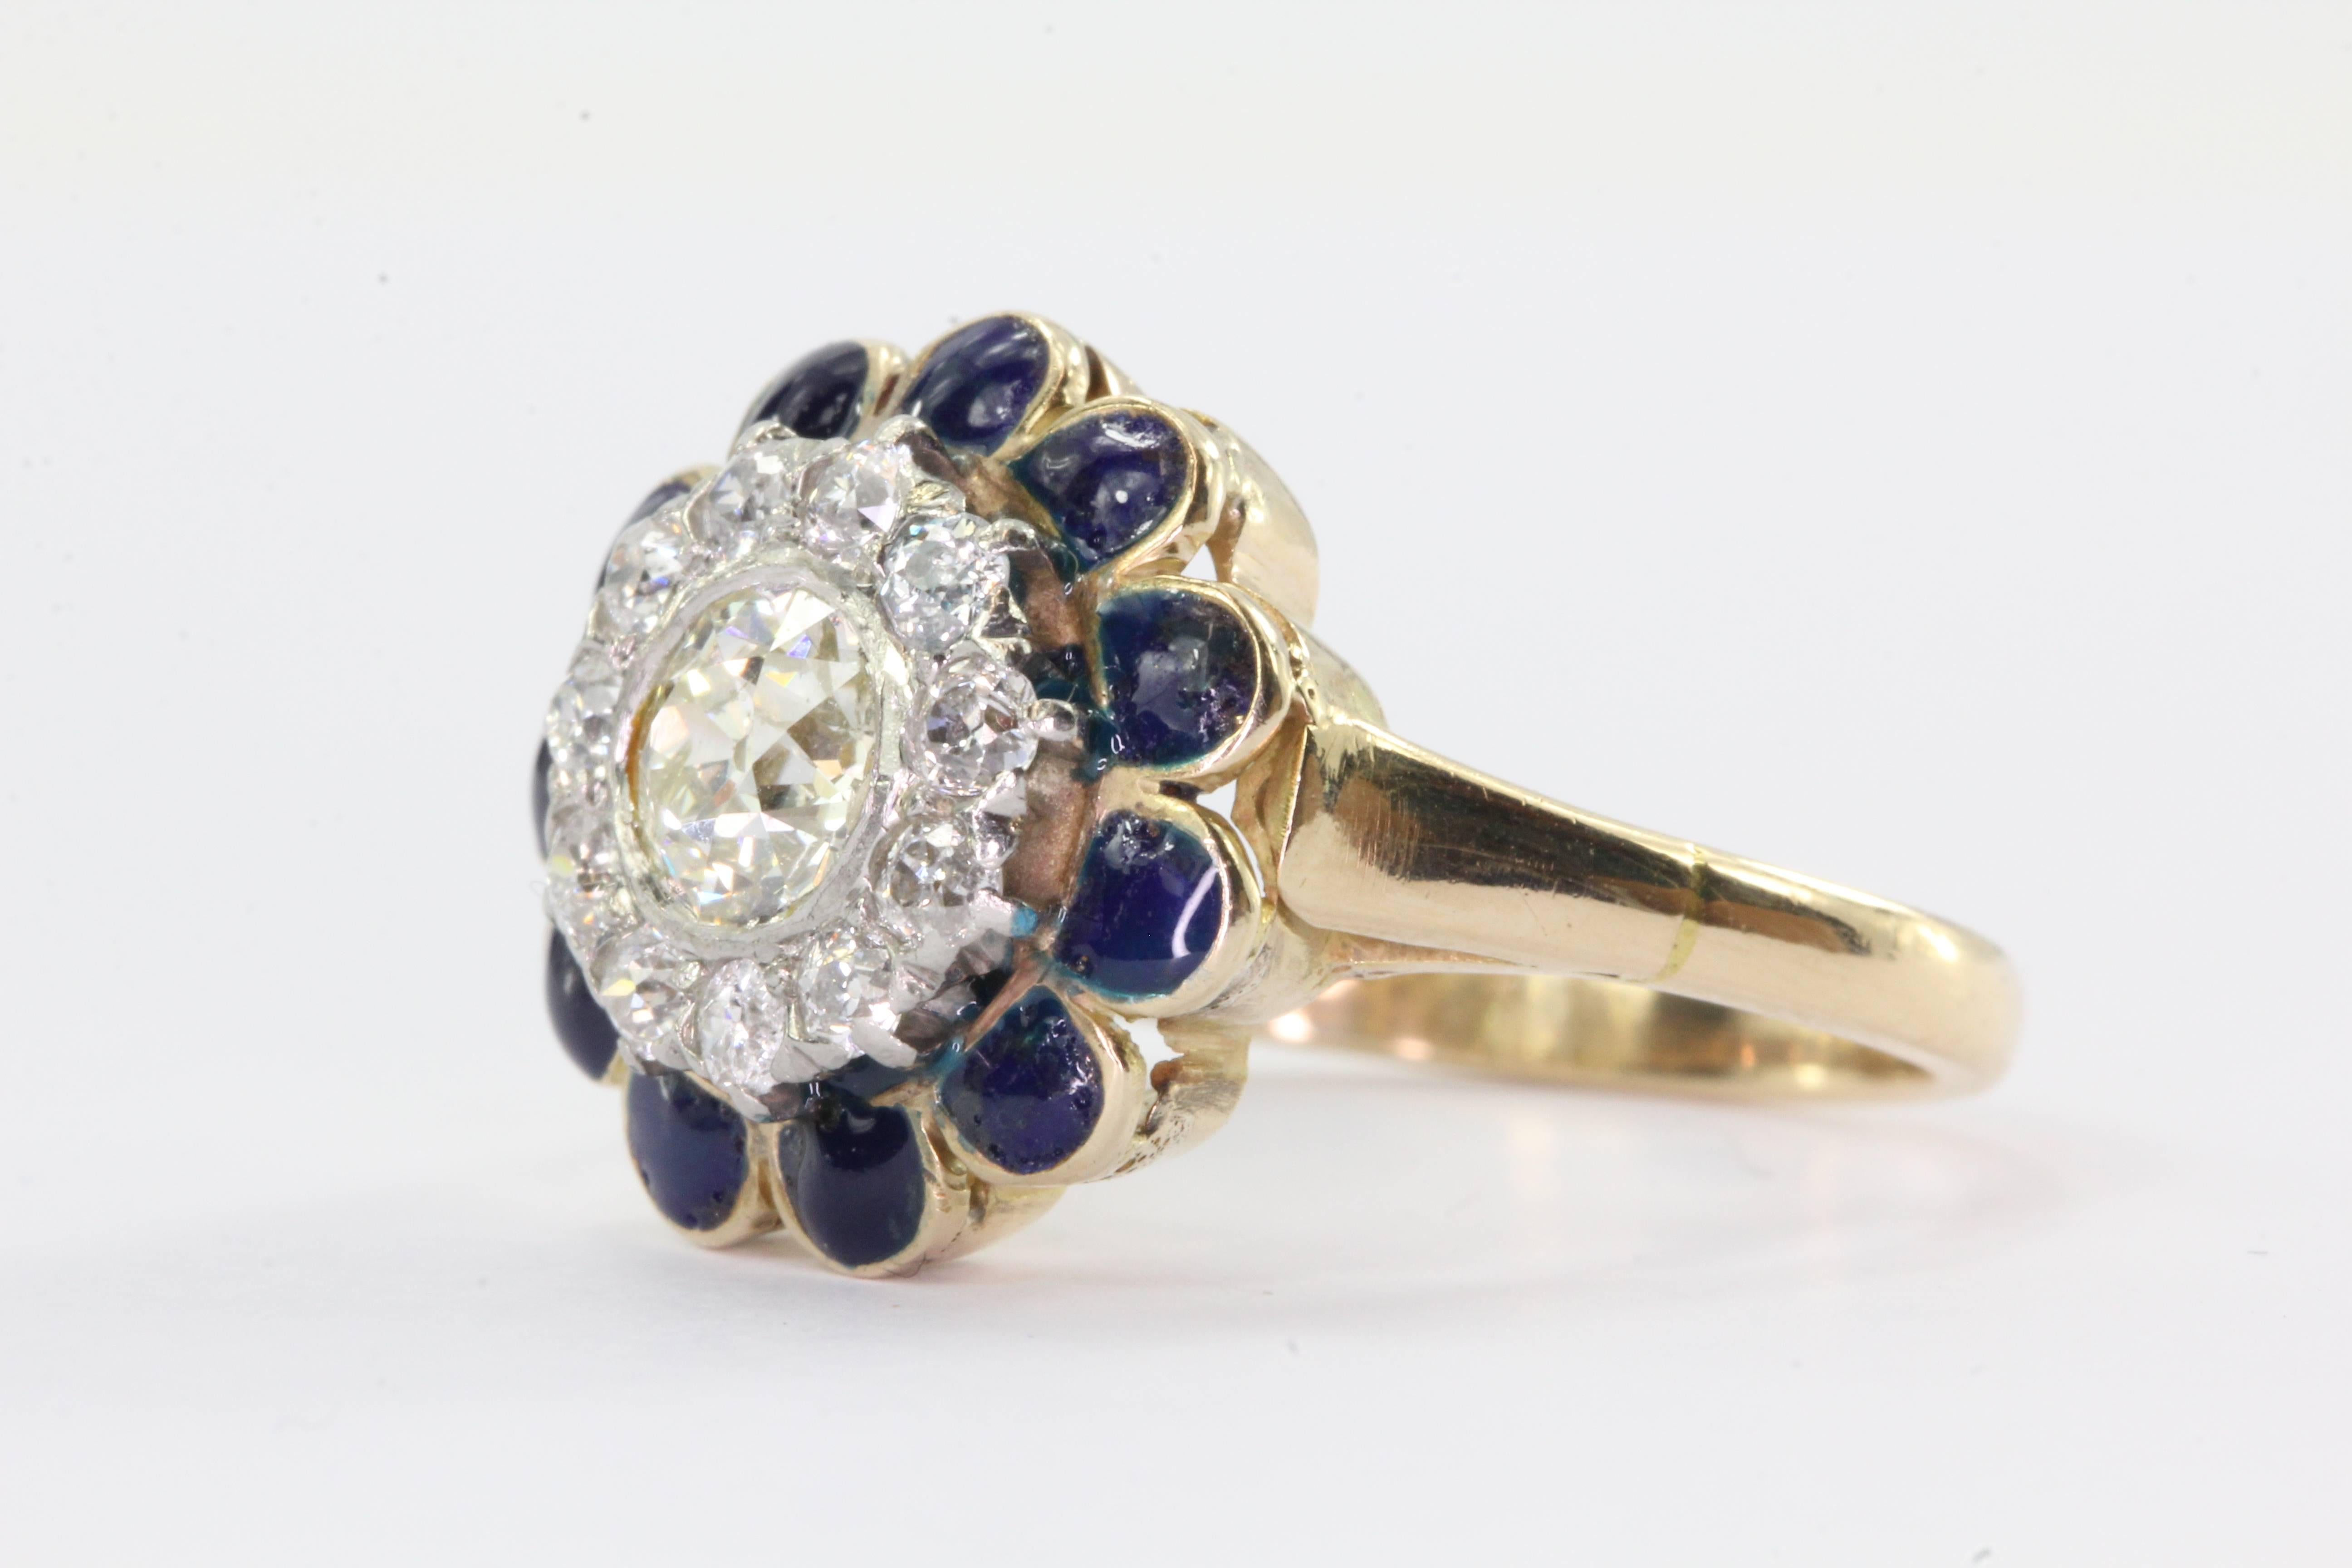 Antique Art Deco 14K Gold Old European Cut Diamond & Blue Enamel Ring. The ring is in excellent estate condition and ready to wear. The ring is hallmarked 14K. It is set with an approximately .54 carat, Si1 clarity, K color old European cut diamond